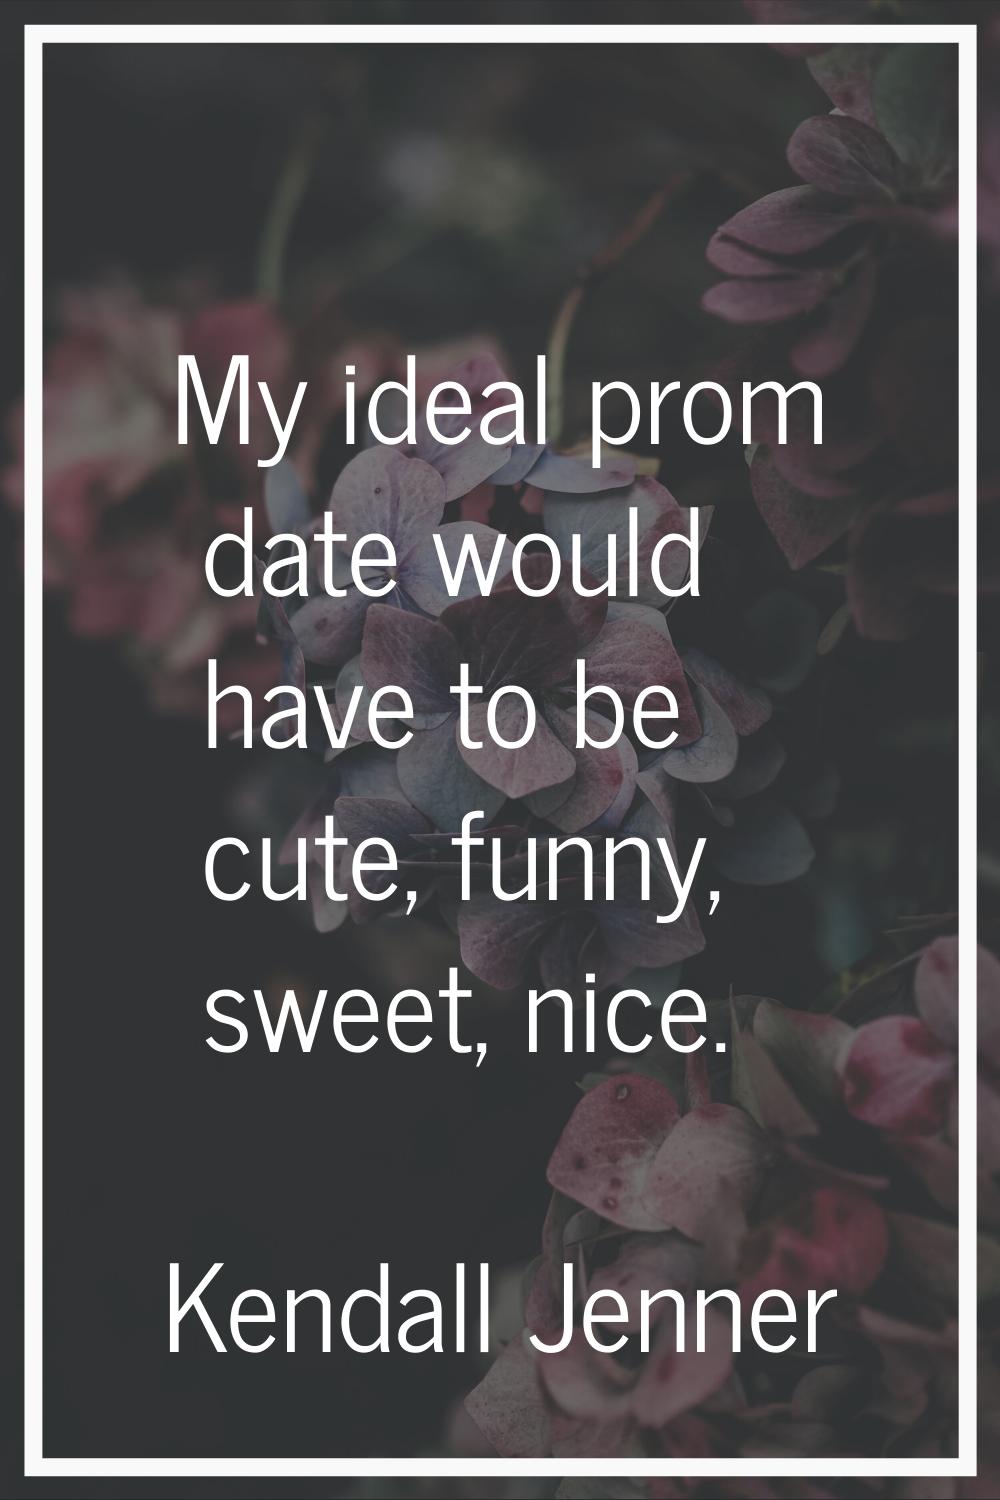 My ideal prom date would have to be cute, funny, sweet, nice.